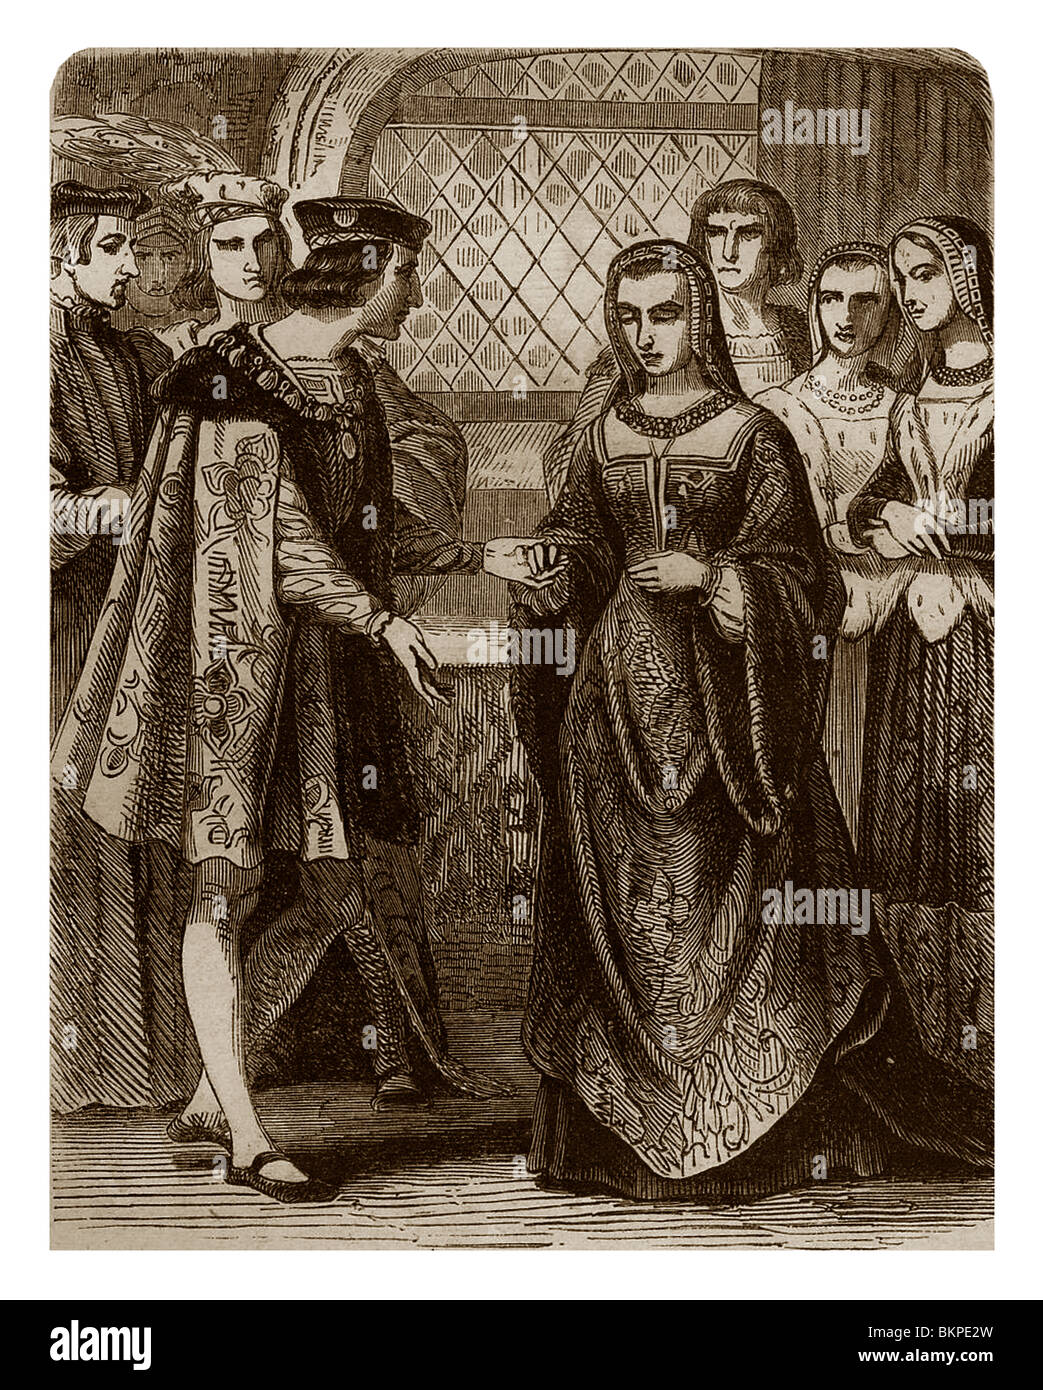 Charles VIII of France (1470-1498) and his wife Anne of Brittany (1477-1514). Stock Photo